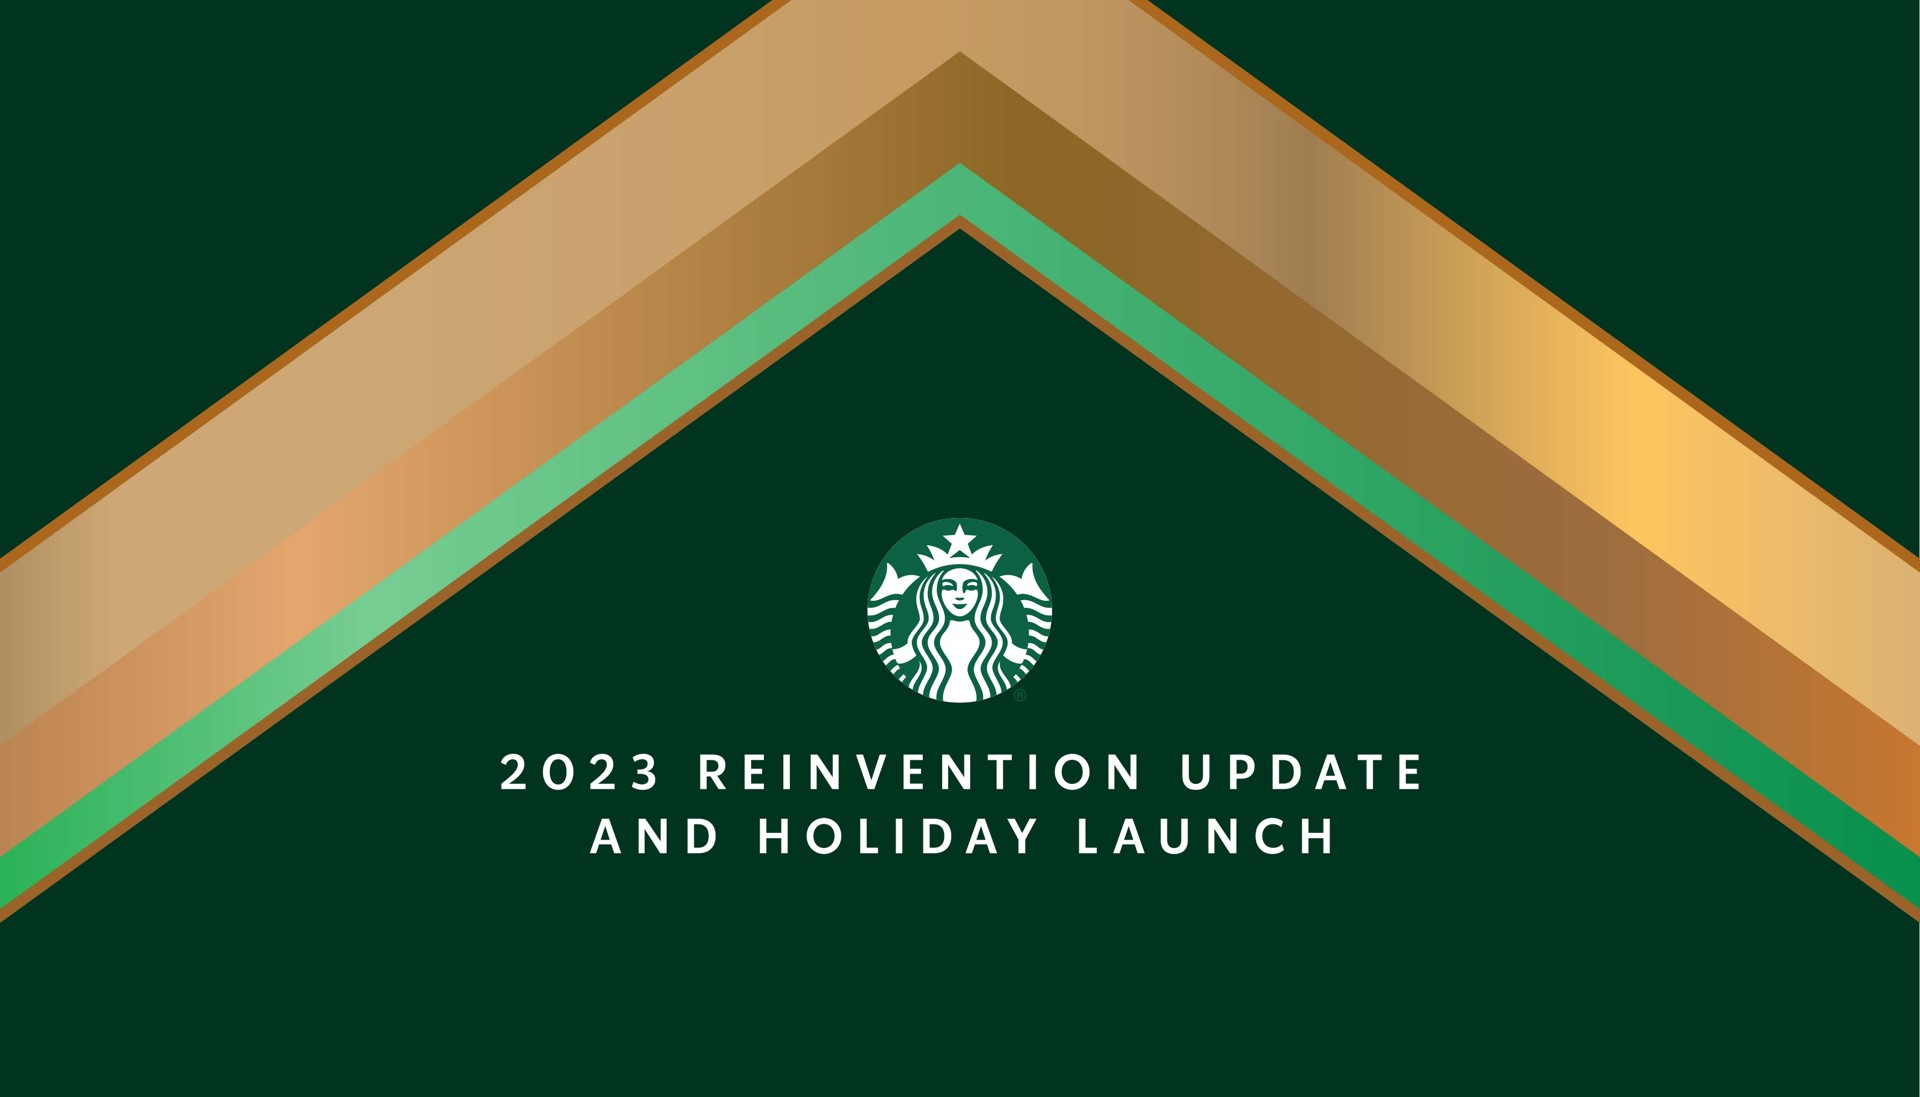 reinvention update and holiday launch | Starbucks